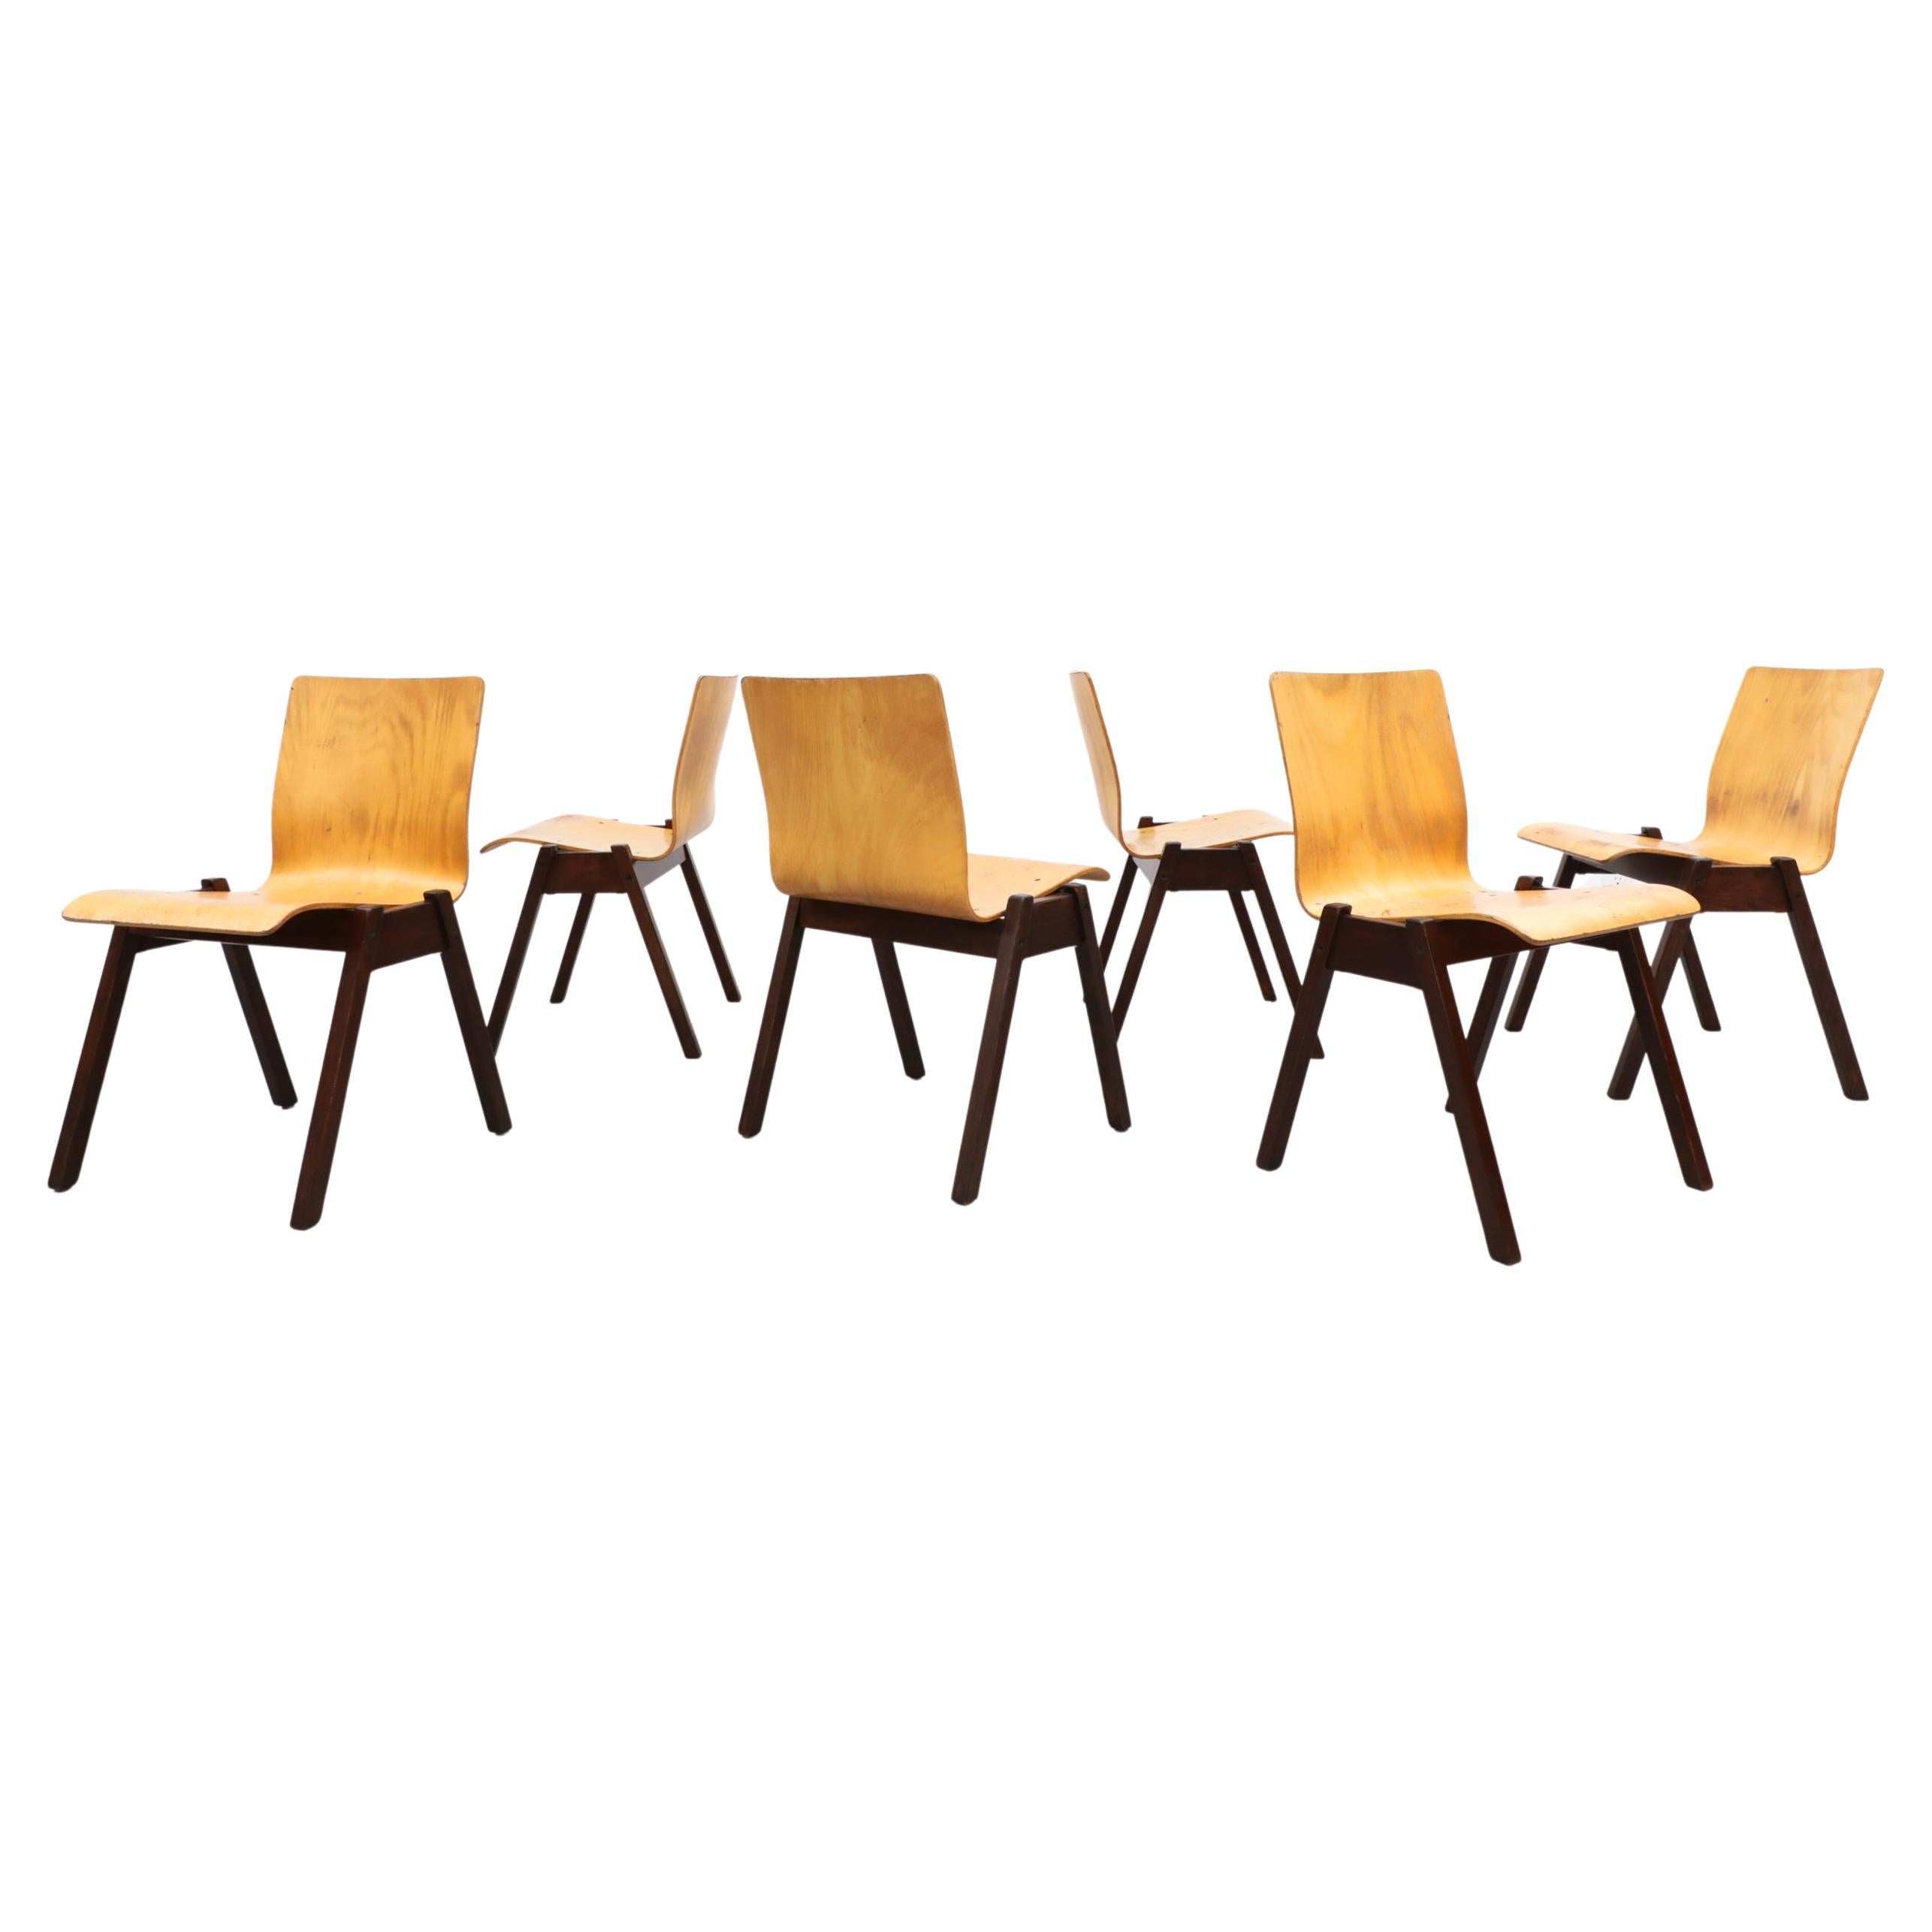 Roland Rainer Style Stacking Chairs Honey Beech & Dark Brown Stained Wood Legs For Sale